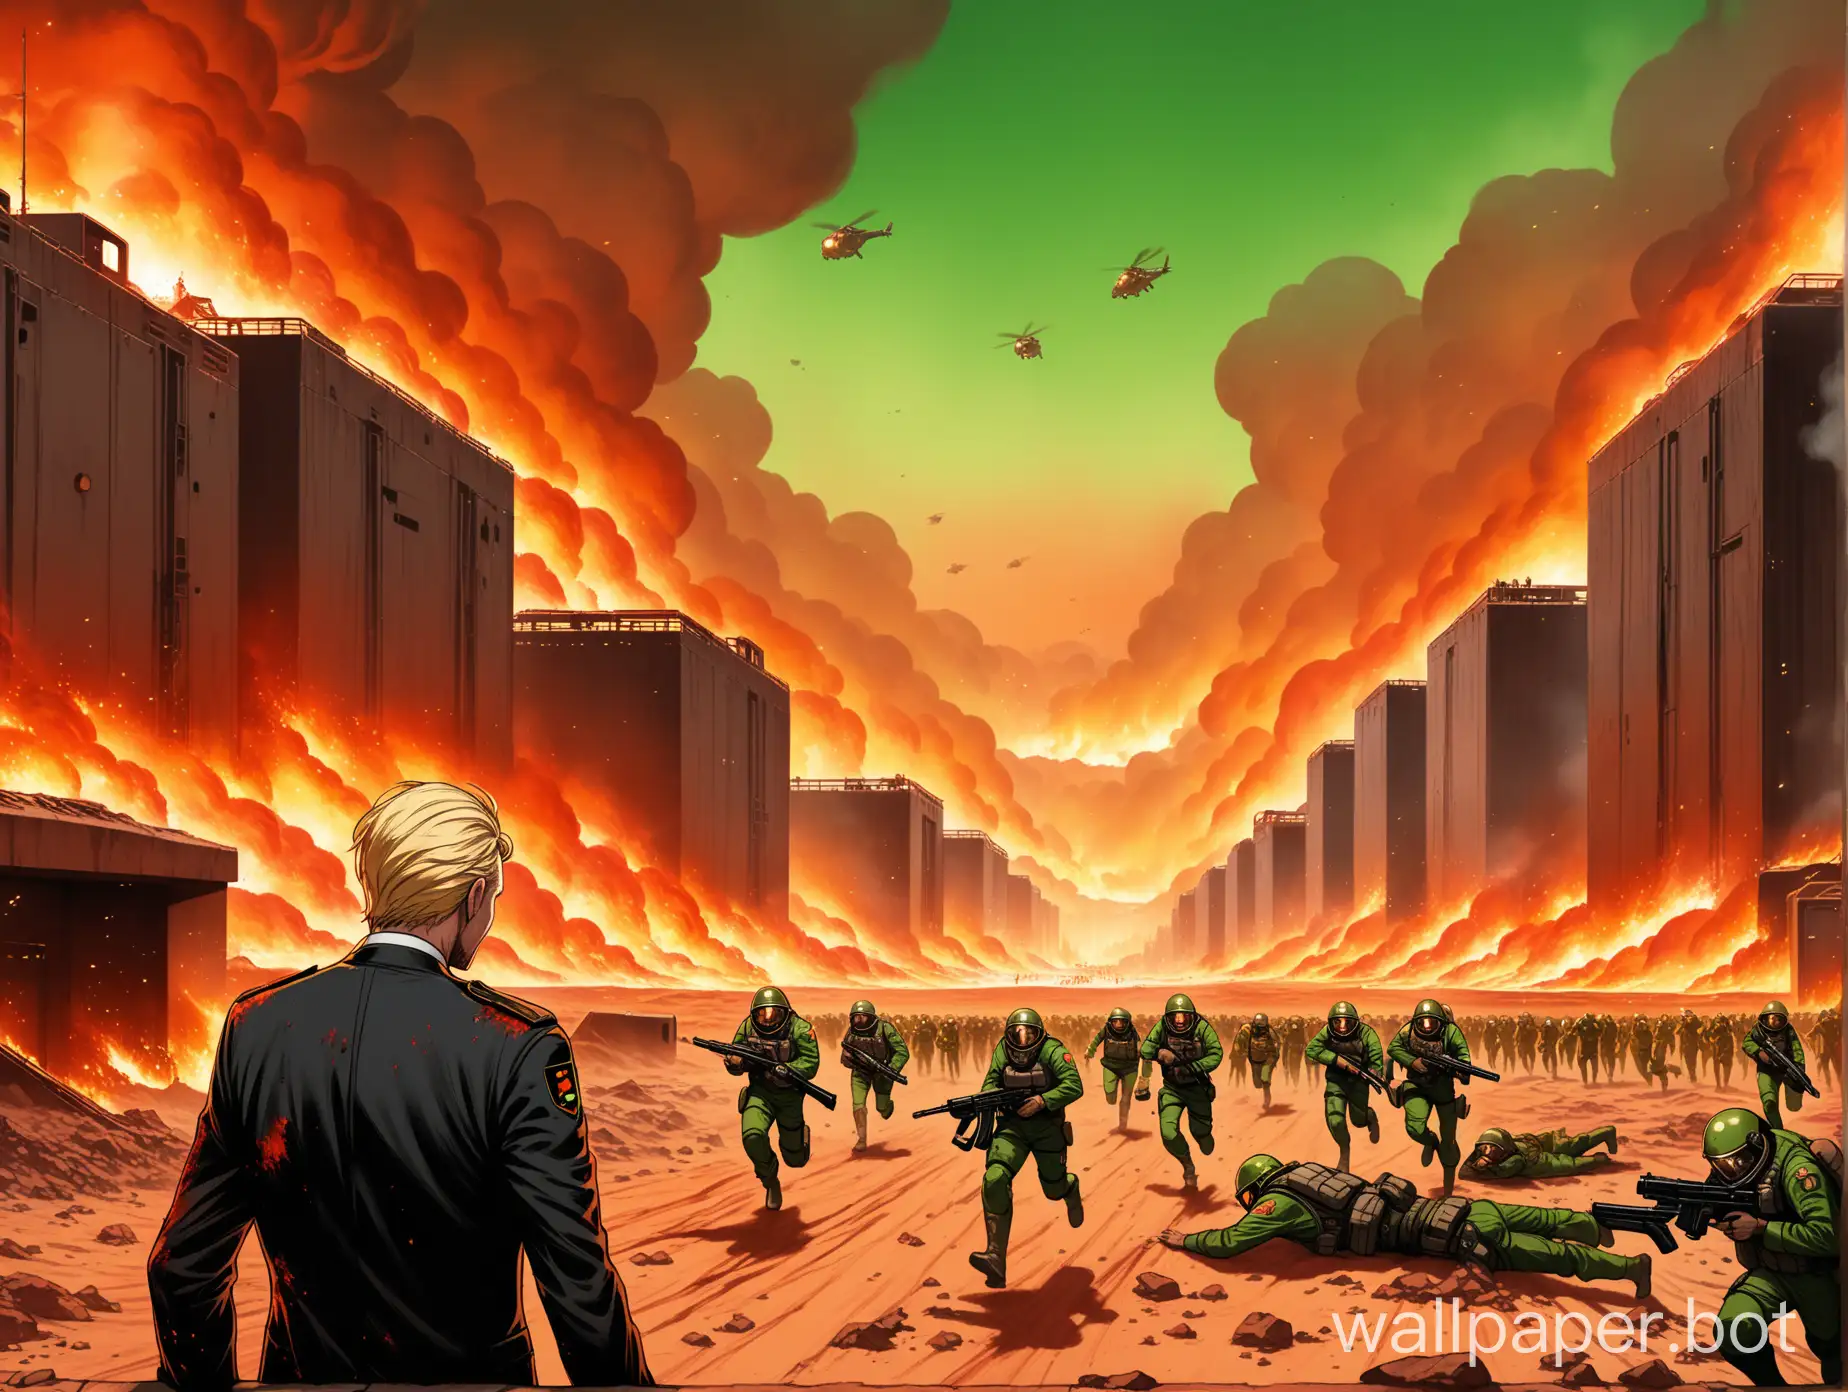 A Tired Stressed German Blonde Man Wearing A Blood Soaked Black Tuxedo With A Old German Hand Gun On Mars Protecting Them From Solders Wearing White Full Body Combat Armor With The Chinese Flag Behind Them People Rushing Into Fallout Shelters And Distant Burning Sky Scrapers With People Jumping Of Of The Roof. The The Distant Green Sky There Are Tungsten Rods Firing Down On The City